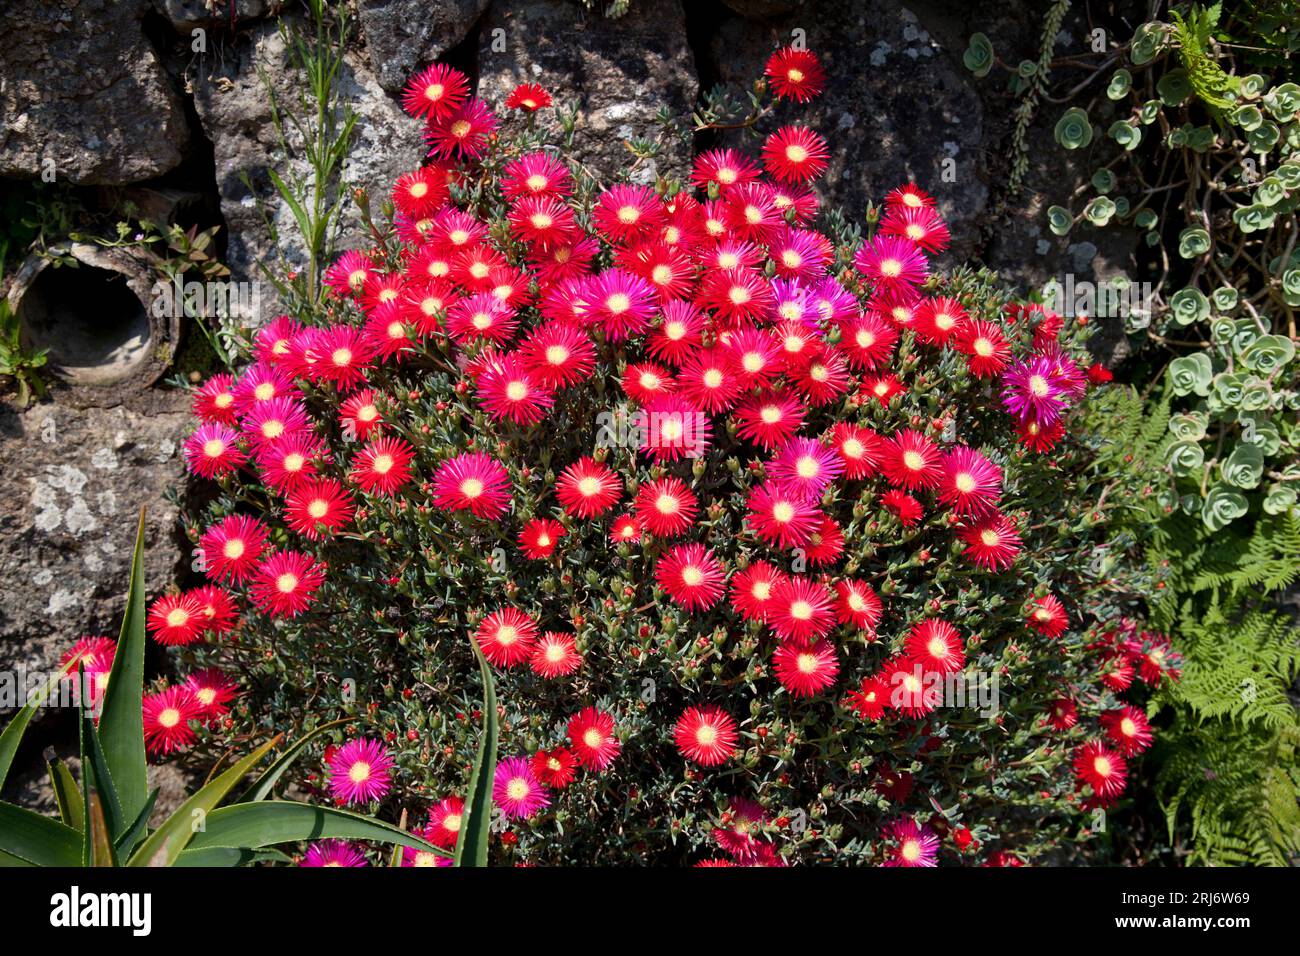 Image of a collection of Drosanthemum flower heads Stock Photo